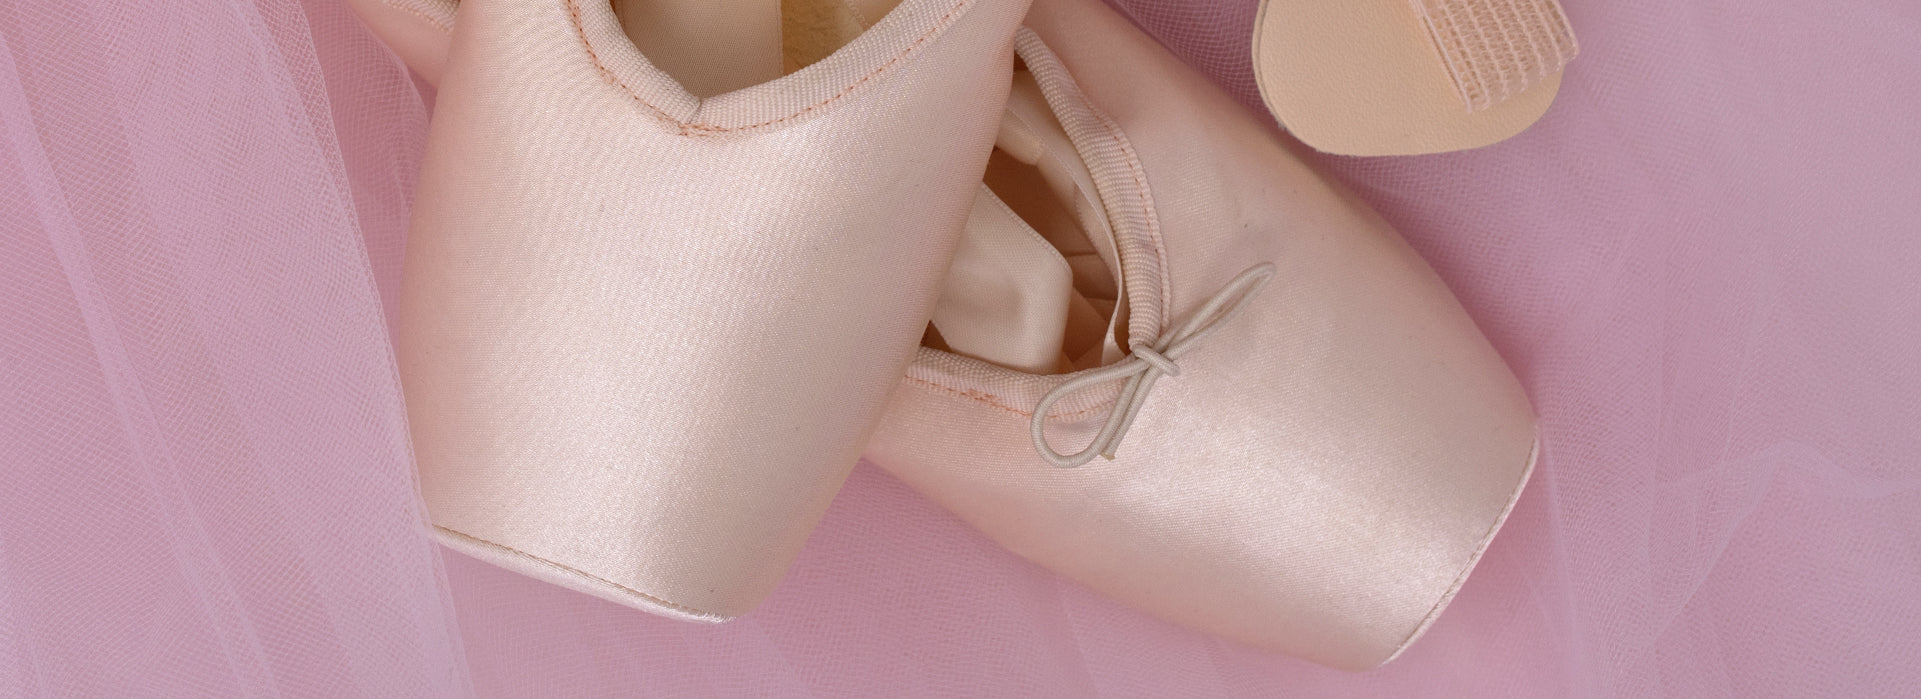 Pointe shoe covers: The Secret to clean pointe shoes